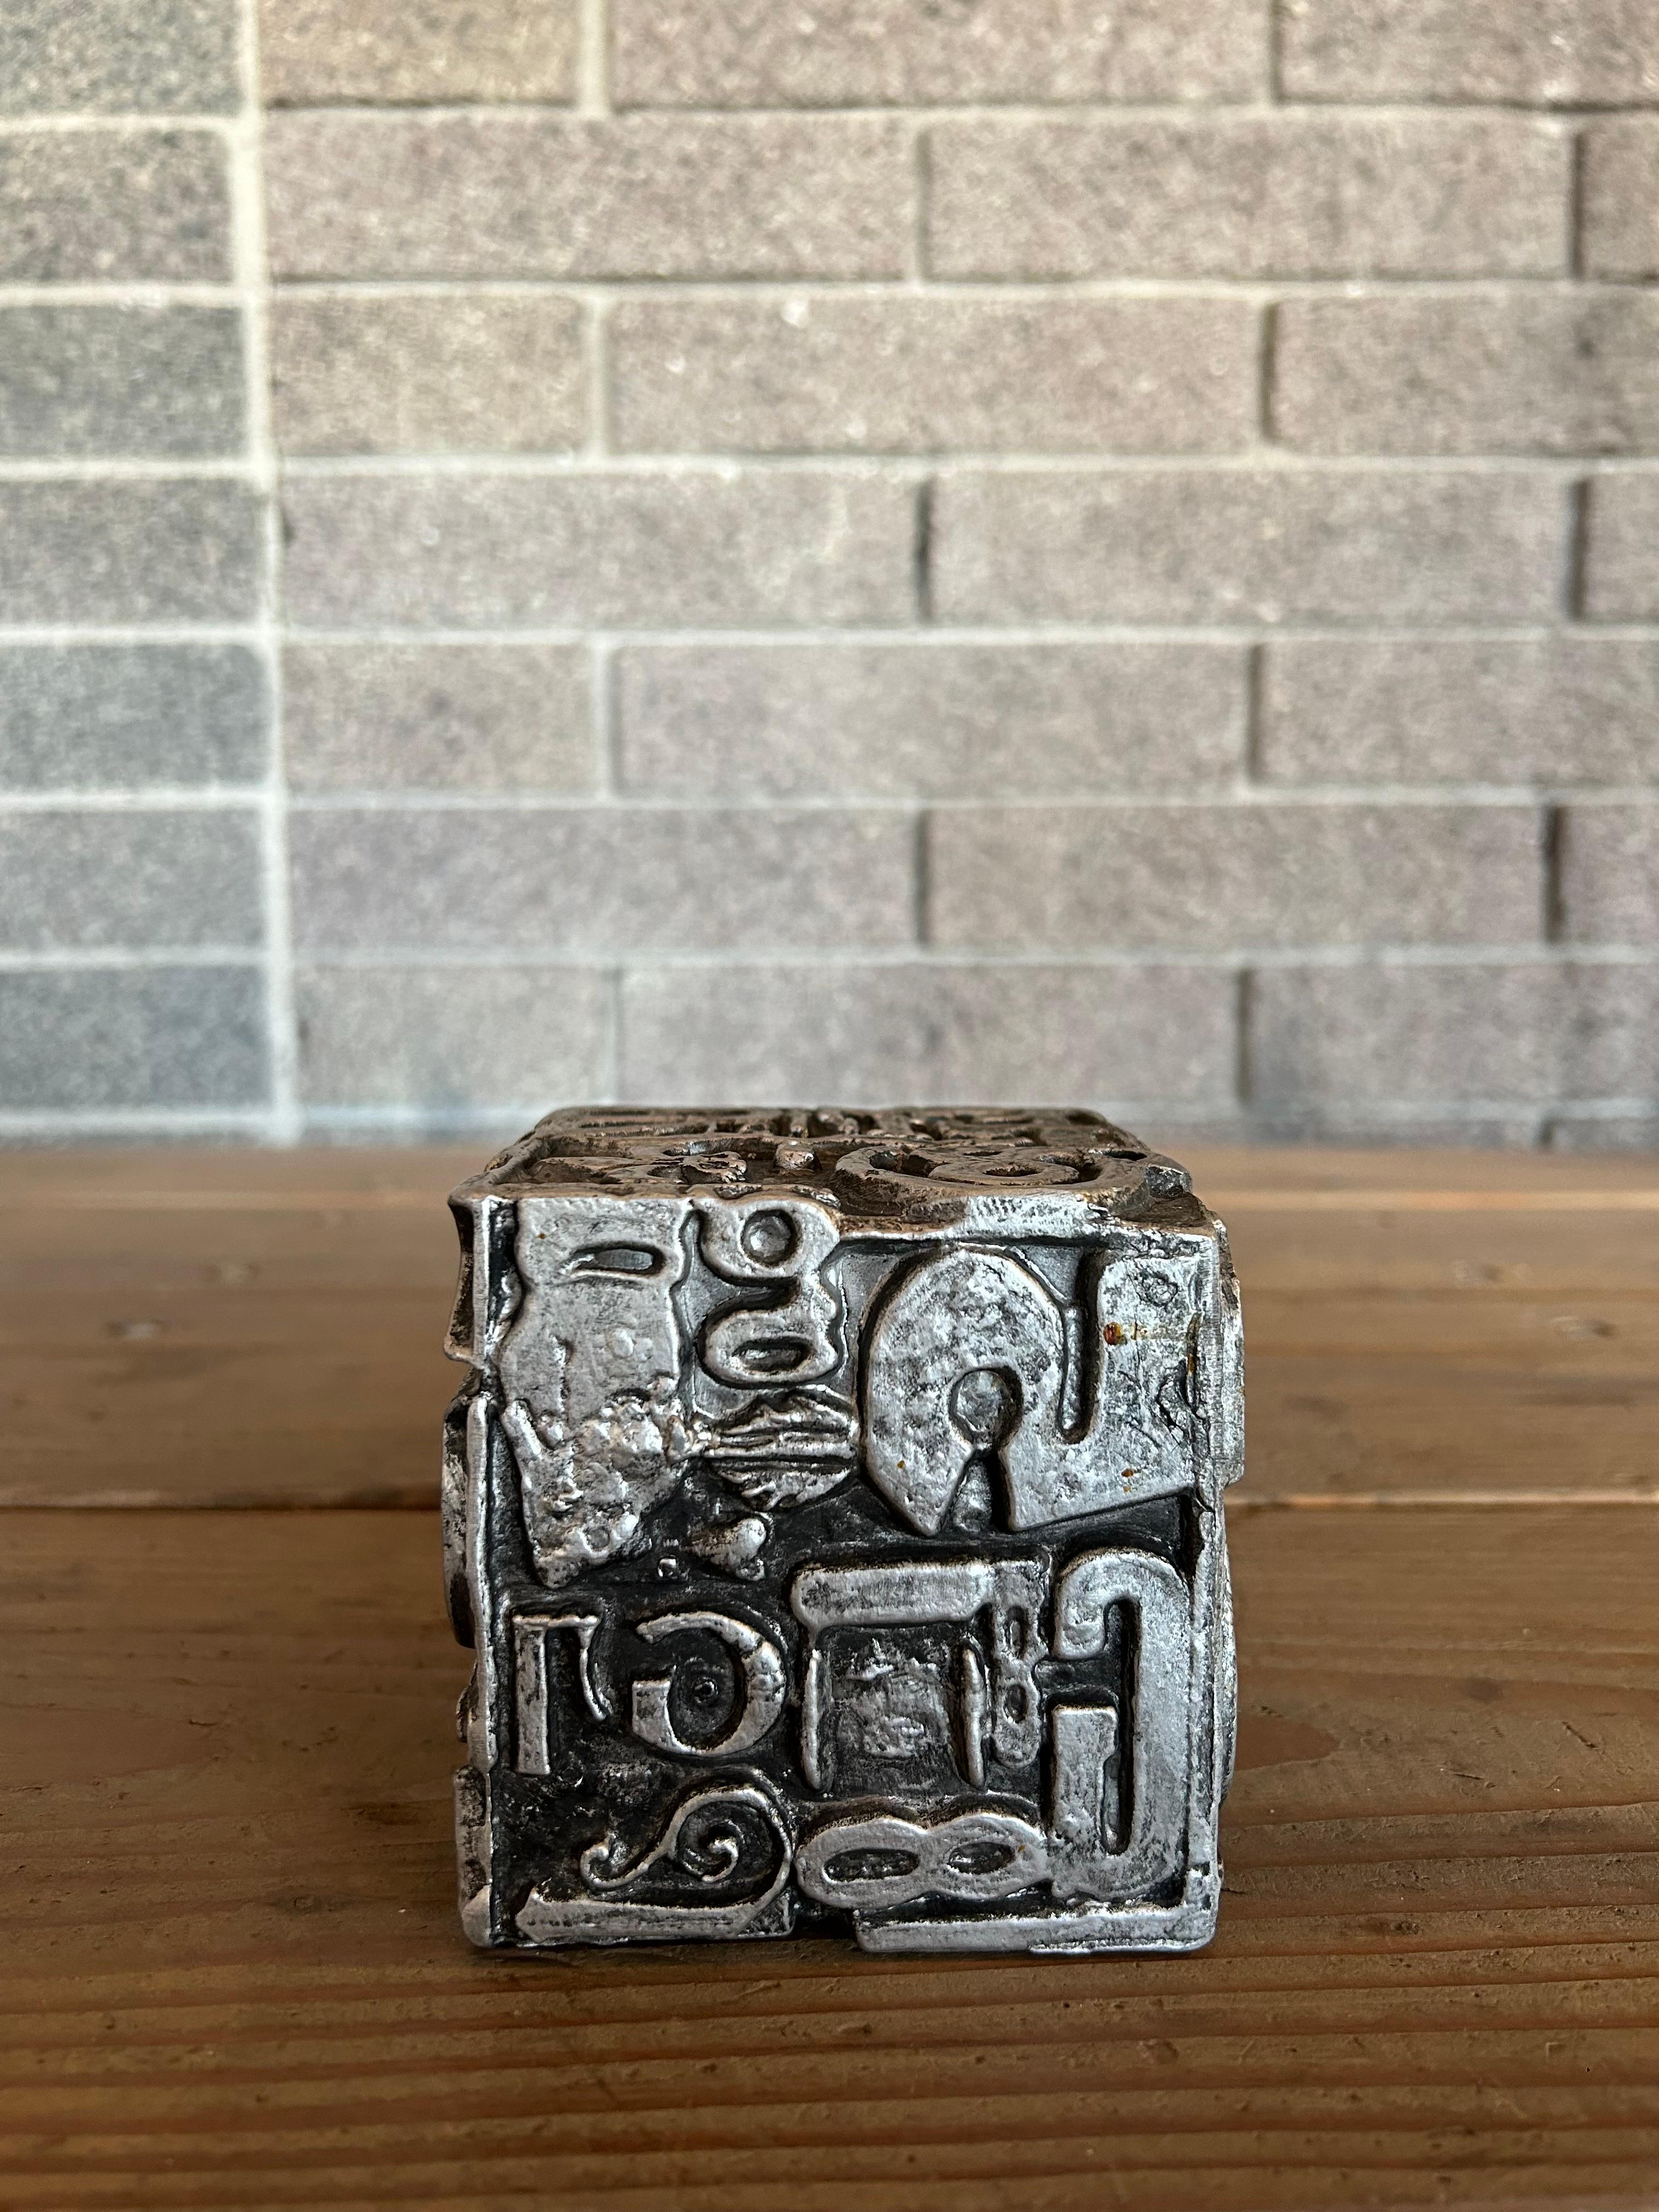 Decorative 1970s MCM cube sculpture in aluminum adorned with text, lettering and graphic design by artist Sheldon Rose. 